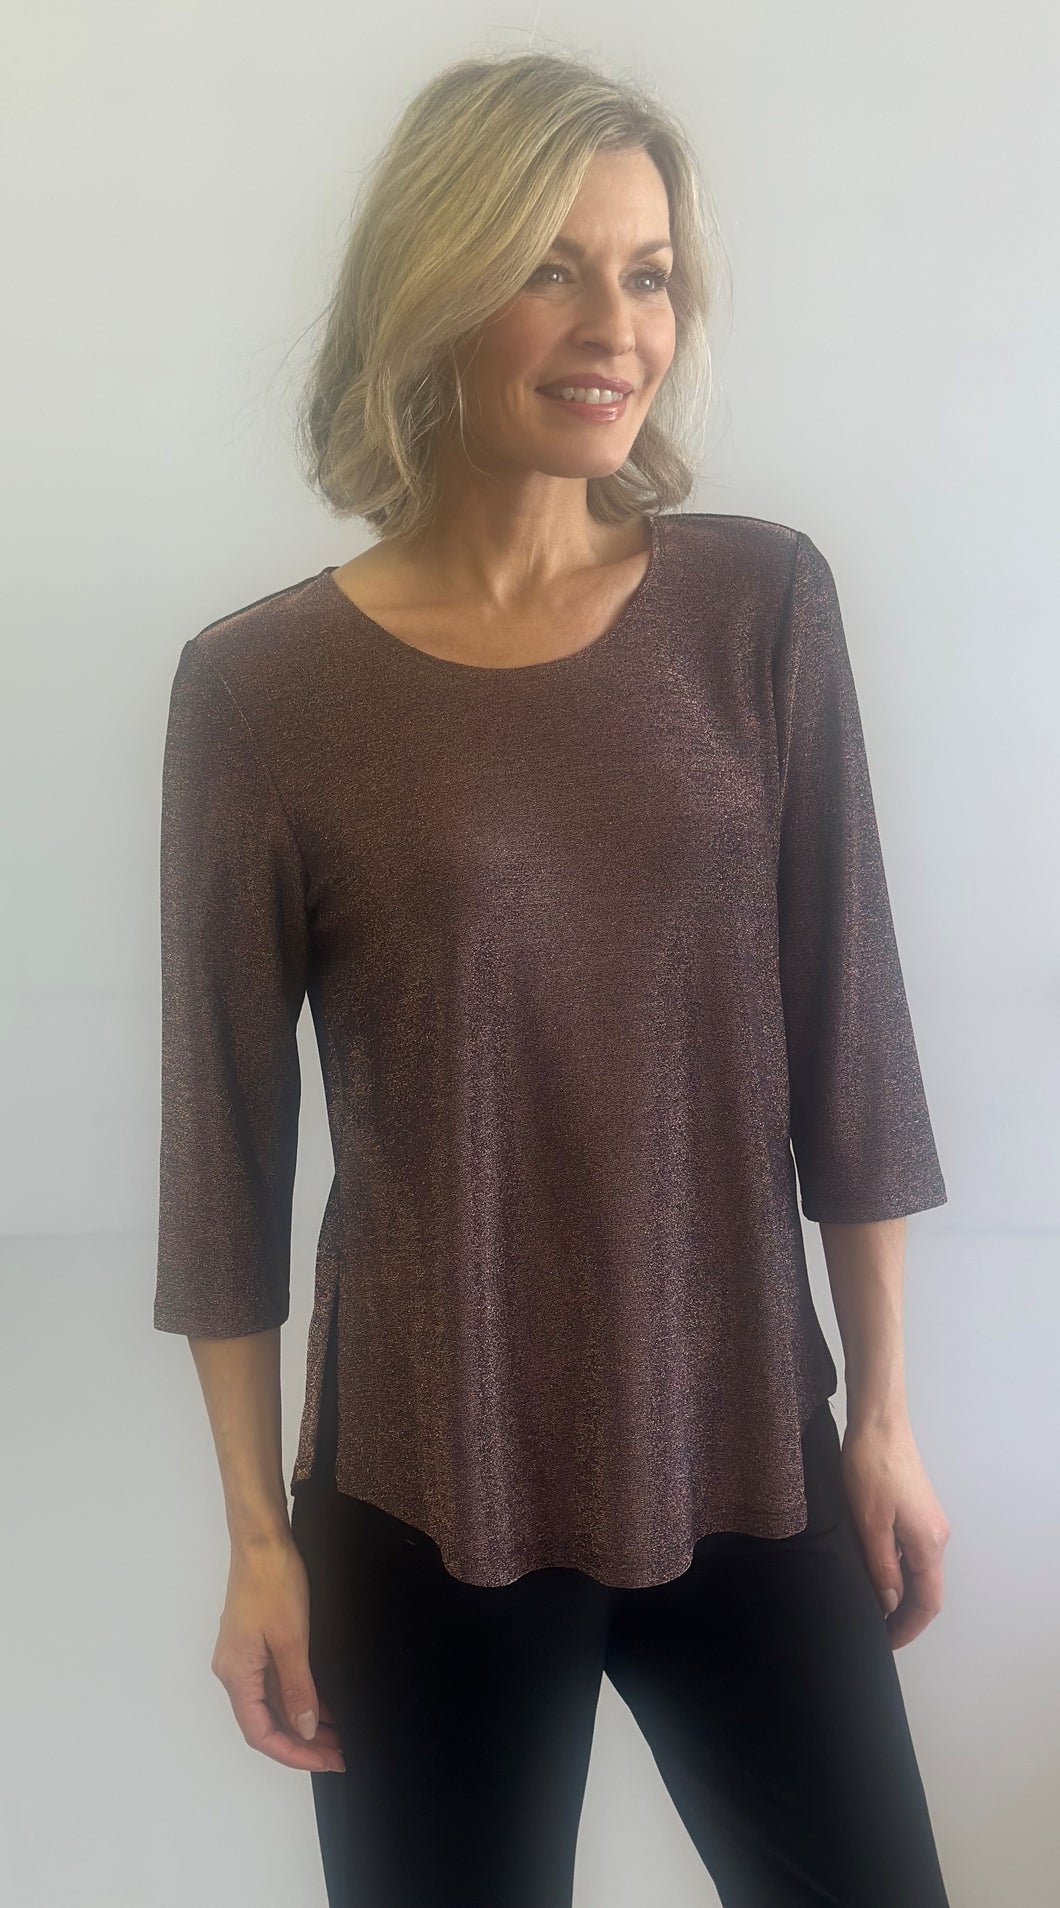 Soft Works Gold 3/4 Sleeve Sparkle Top